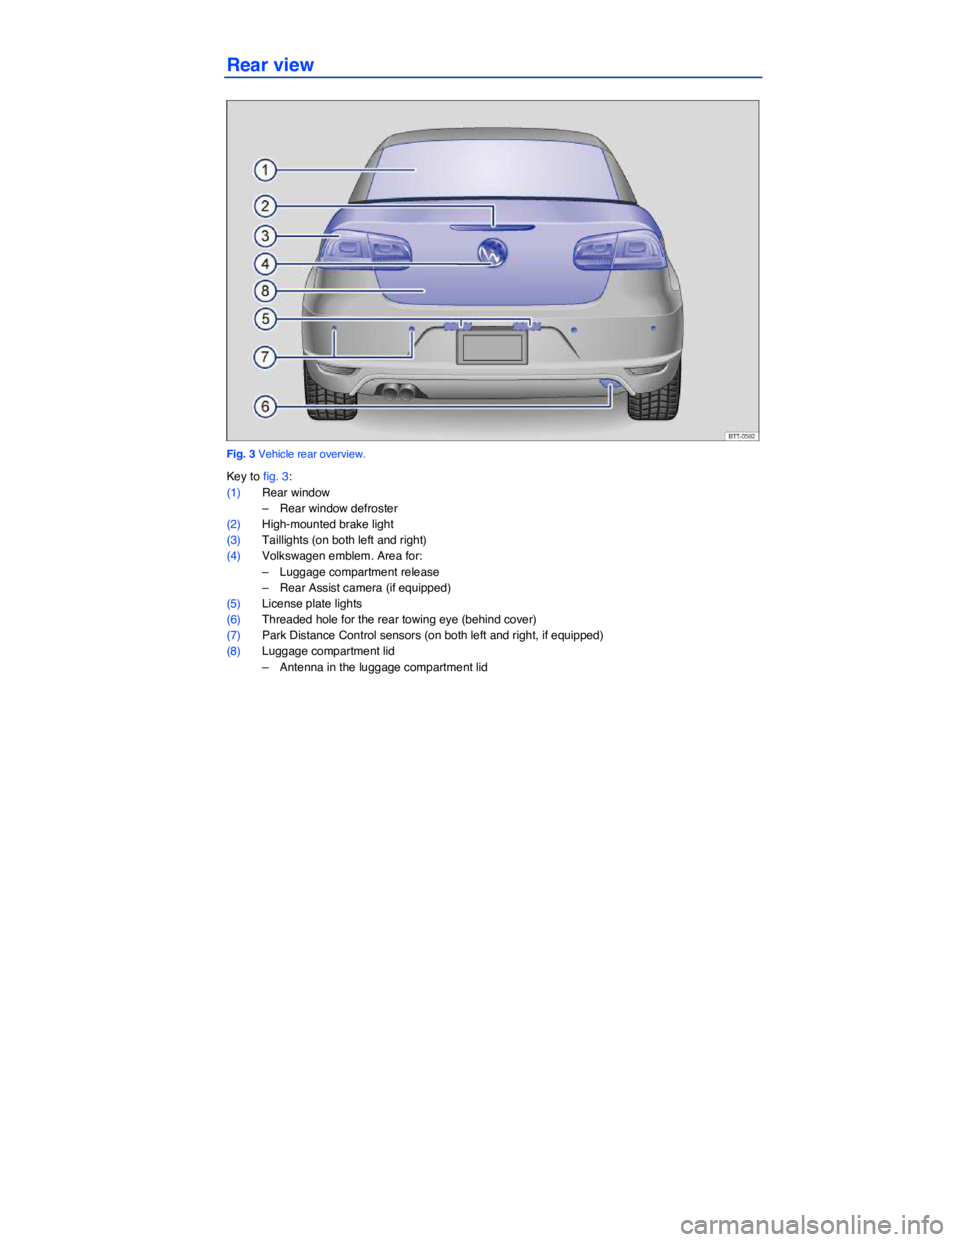 VOLKSWAGEN EOS 2007  Owners Manual  
 
Rear view 
 
Fig. 3 Vehicle rear overview. 
Key to fig. 3: 
(1) Rear window 
–  Rear window defroster  
(2) High-mounted brake light 
(3) Taillights (on both left and right)  
(4) Volkswagen emb